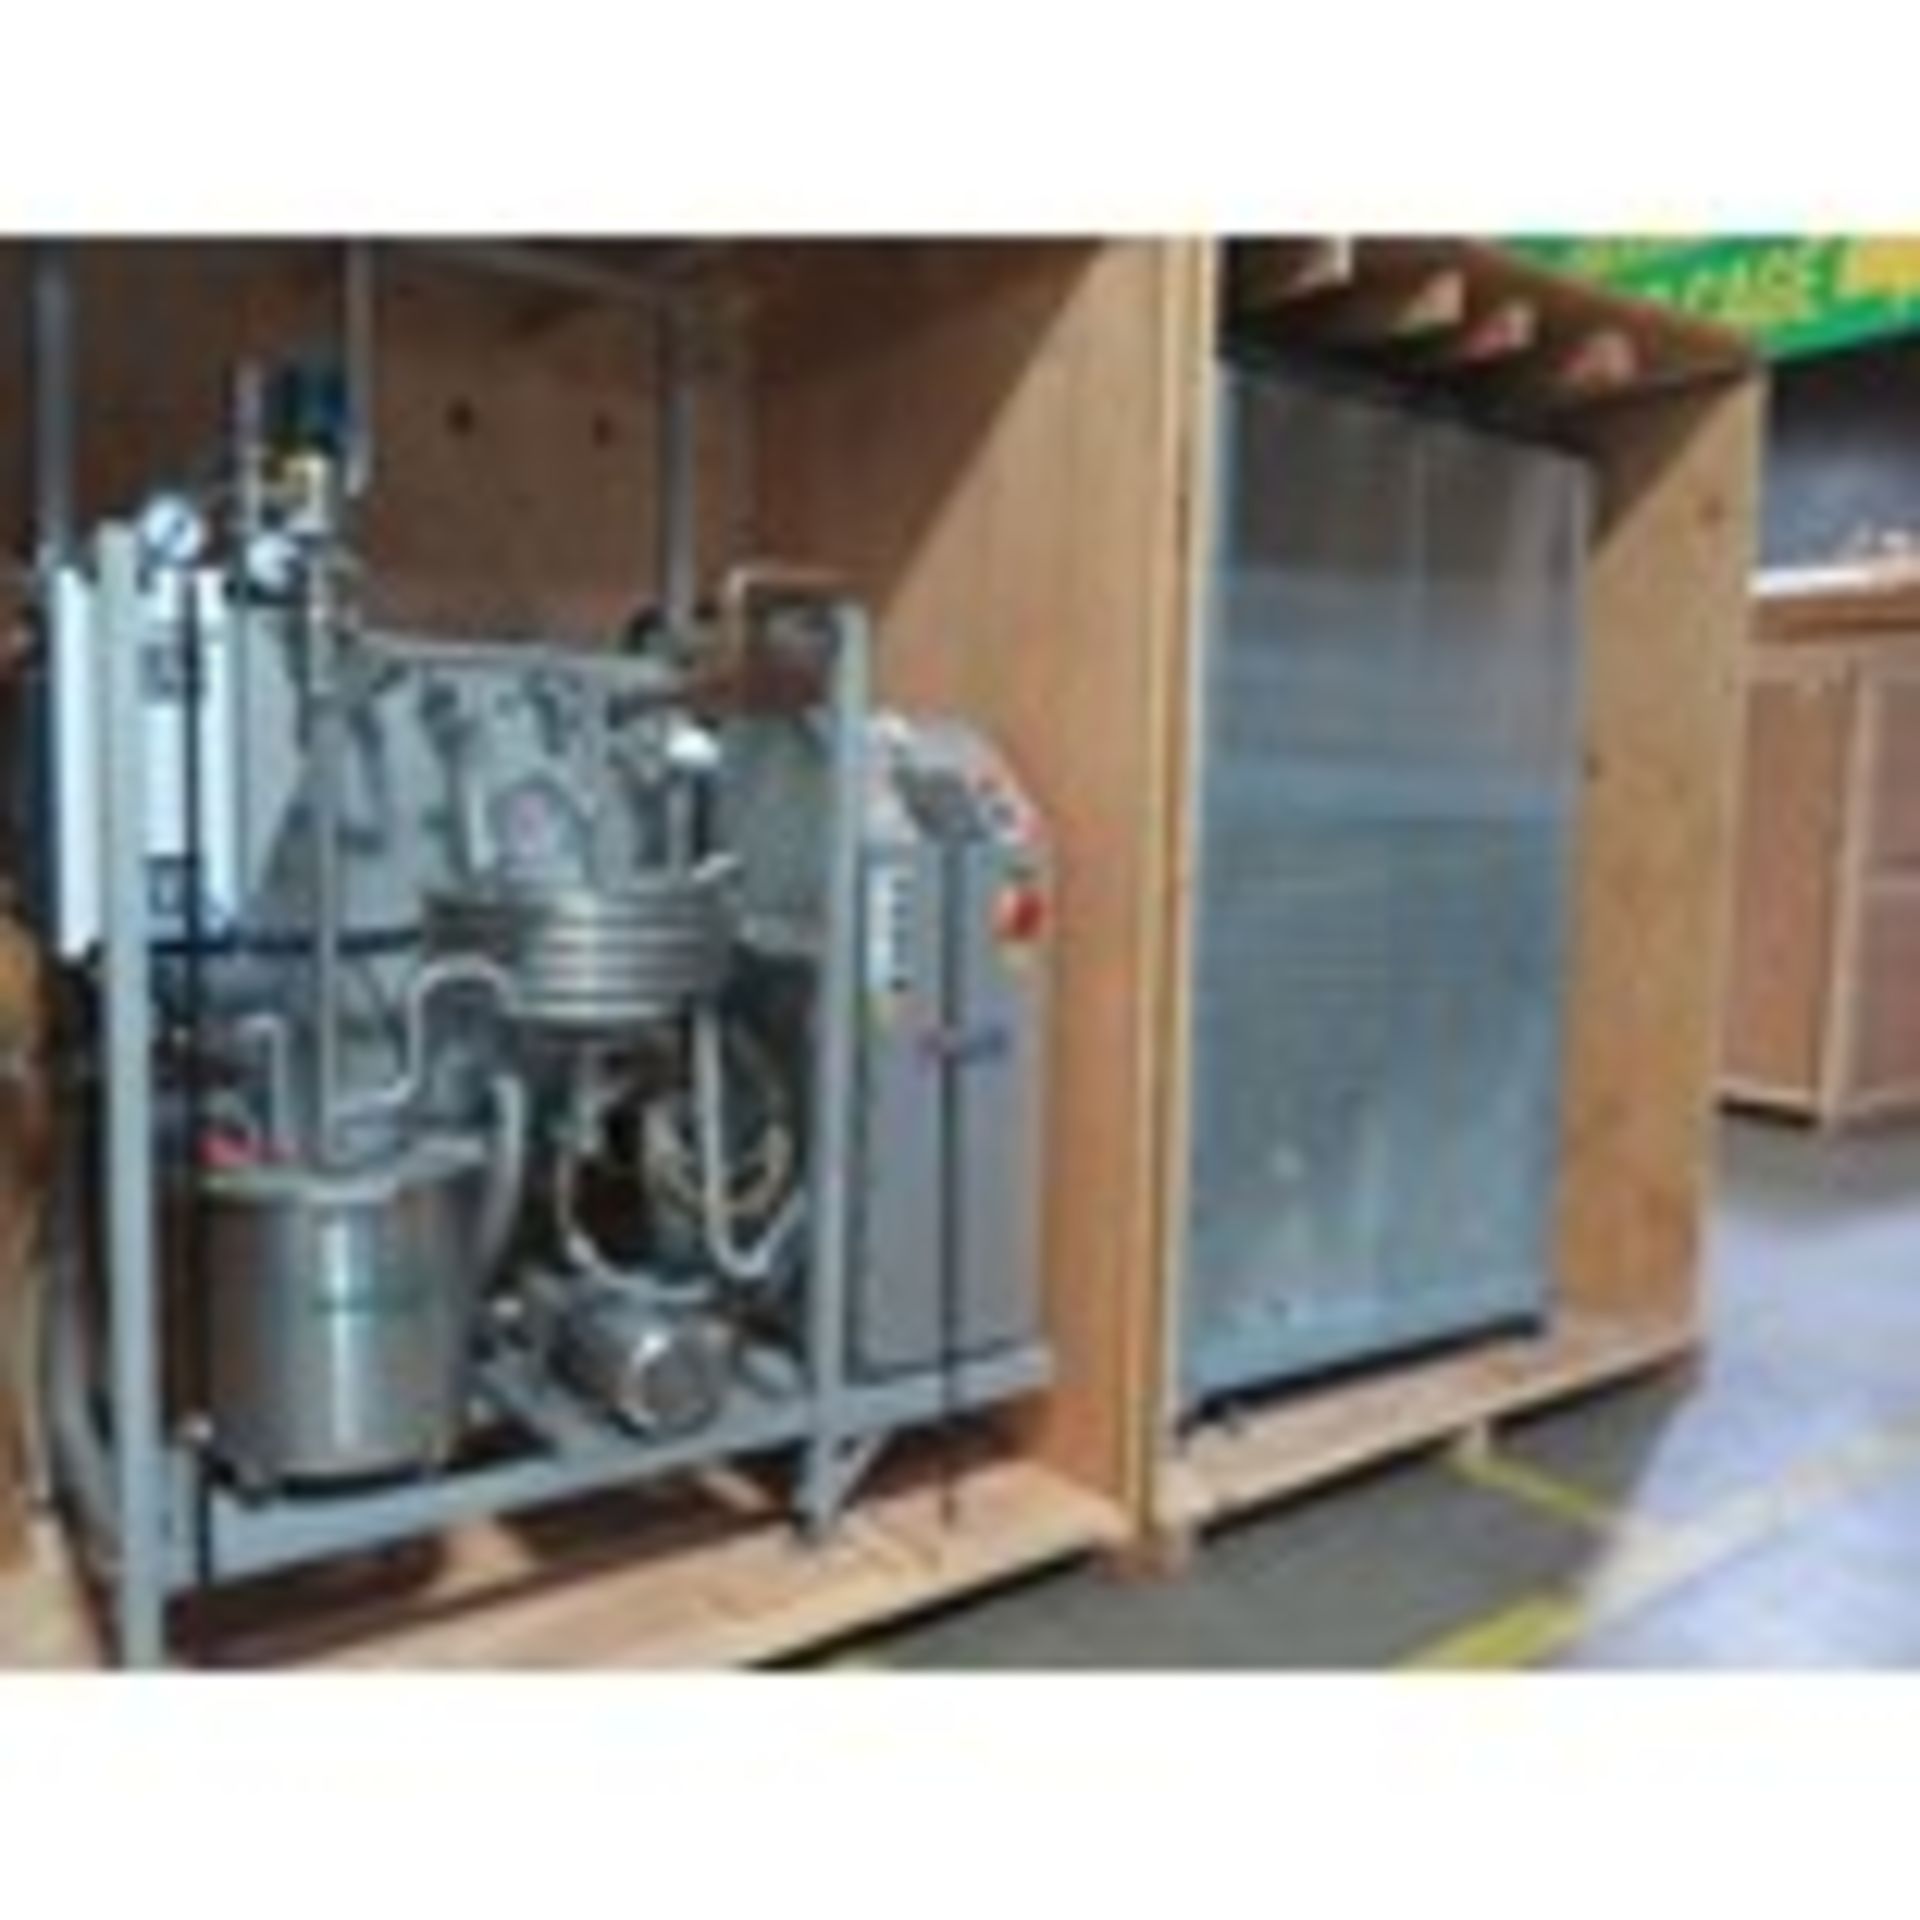 2010 Goodnature Products mdl. PNP360 Pasteurization System s/n 20992-1 w/ Mokon Controls System, - Image 2 of 4